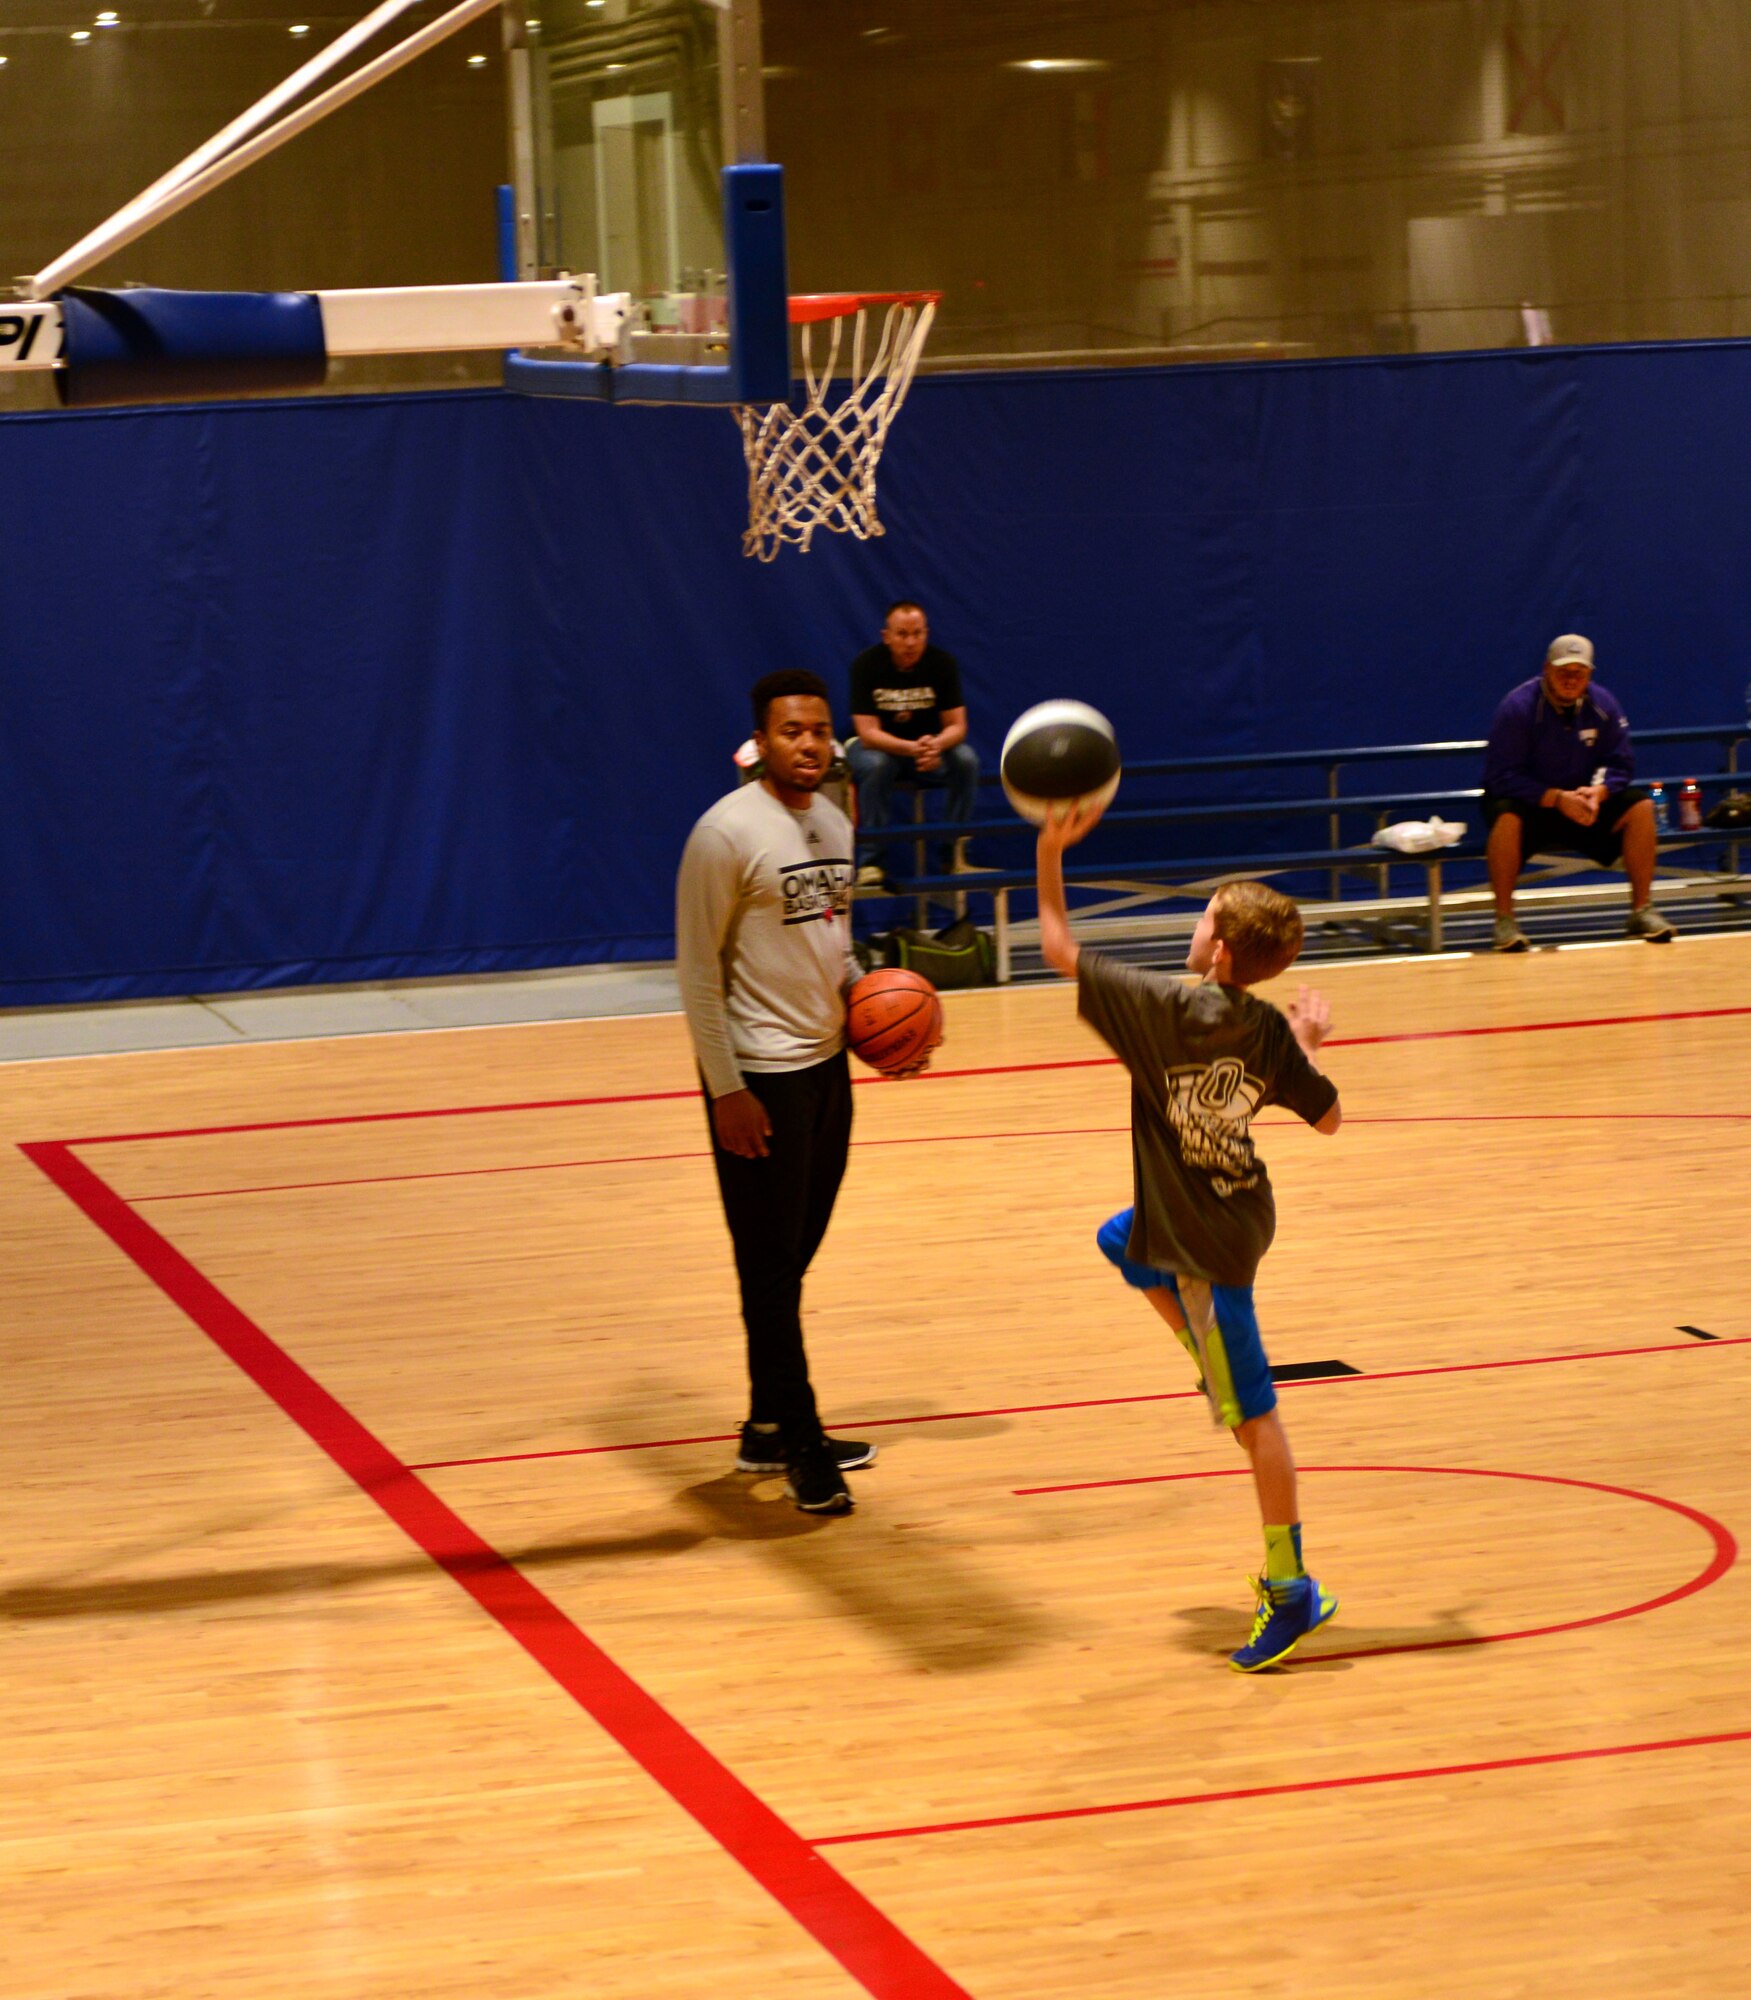 A Team Offutt child works on their off-hand layups under the watchful eye of a University of Nebraska Omaha Mavericks player Oct. 15, 2016 at the Offutt Field House.  The UNO Mavericks’ men’s and women’s basketball teams provided a free basketball clinic to more than 100 military-affiliated children. Nebraska Governor Pete Ricketts spoke to the campers and passed along thanks from the citizens of Nebraska to the members of Team Offutt. 